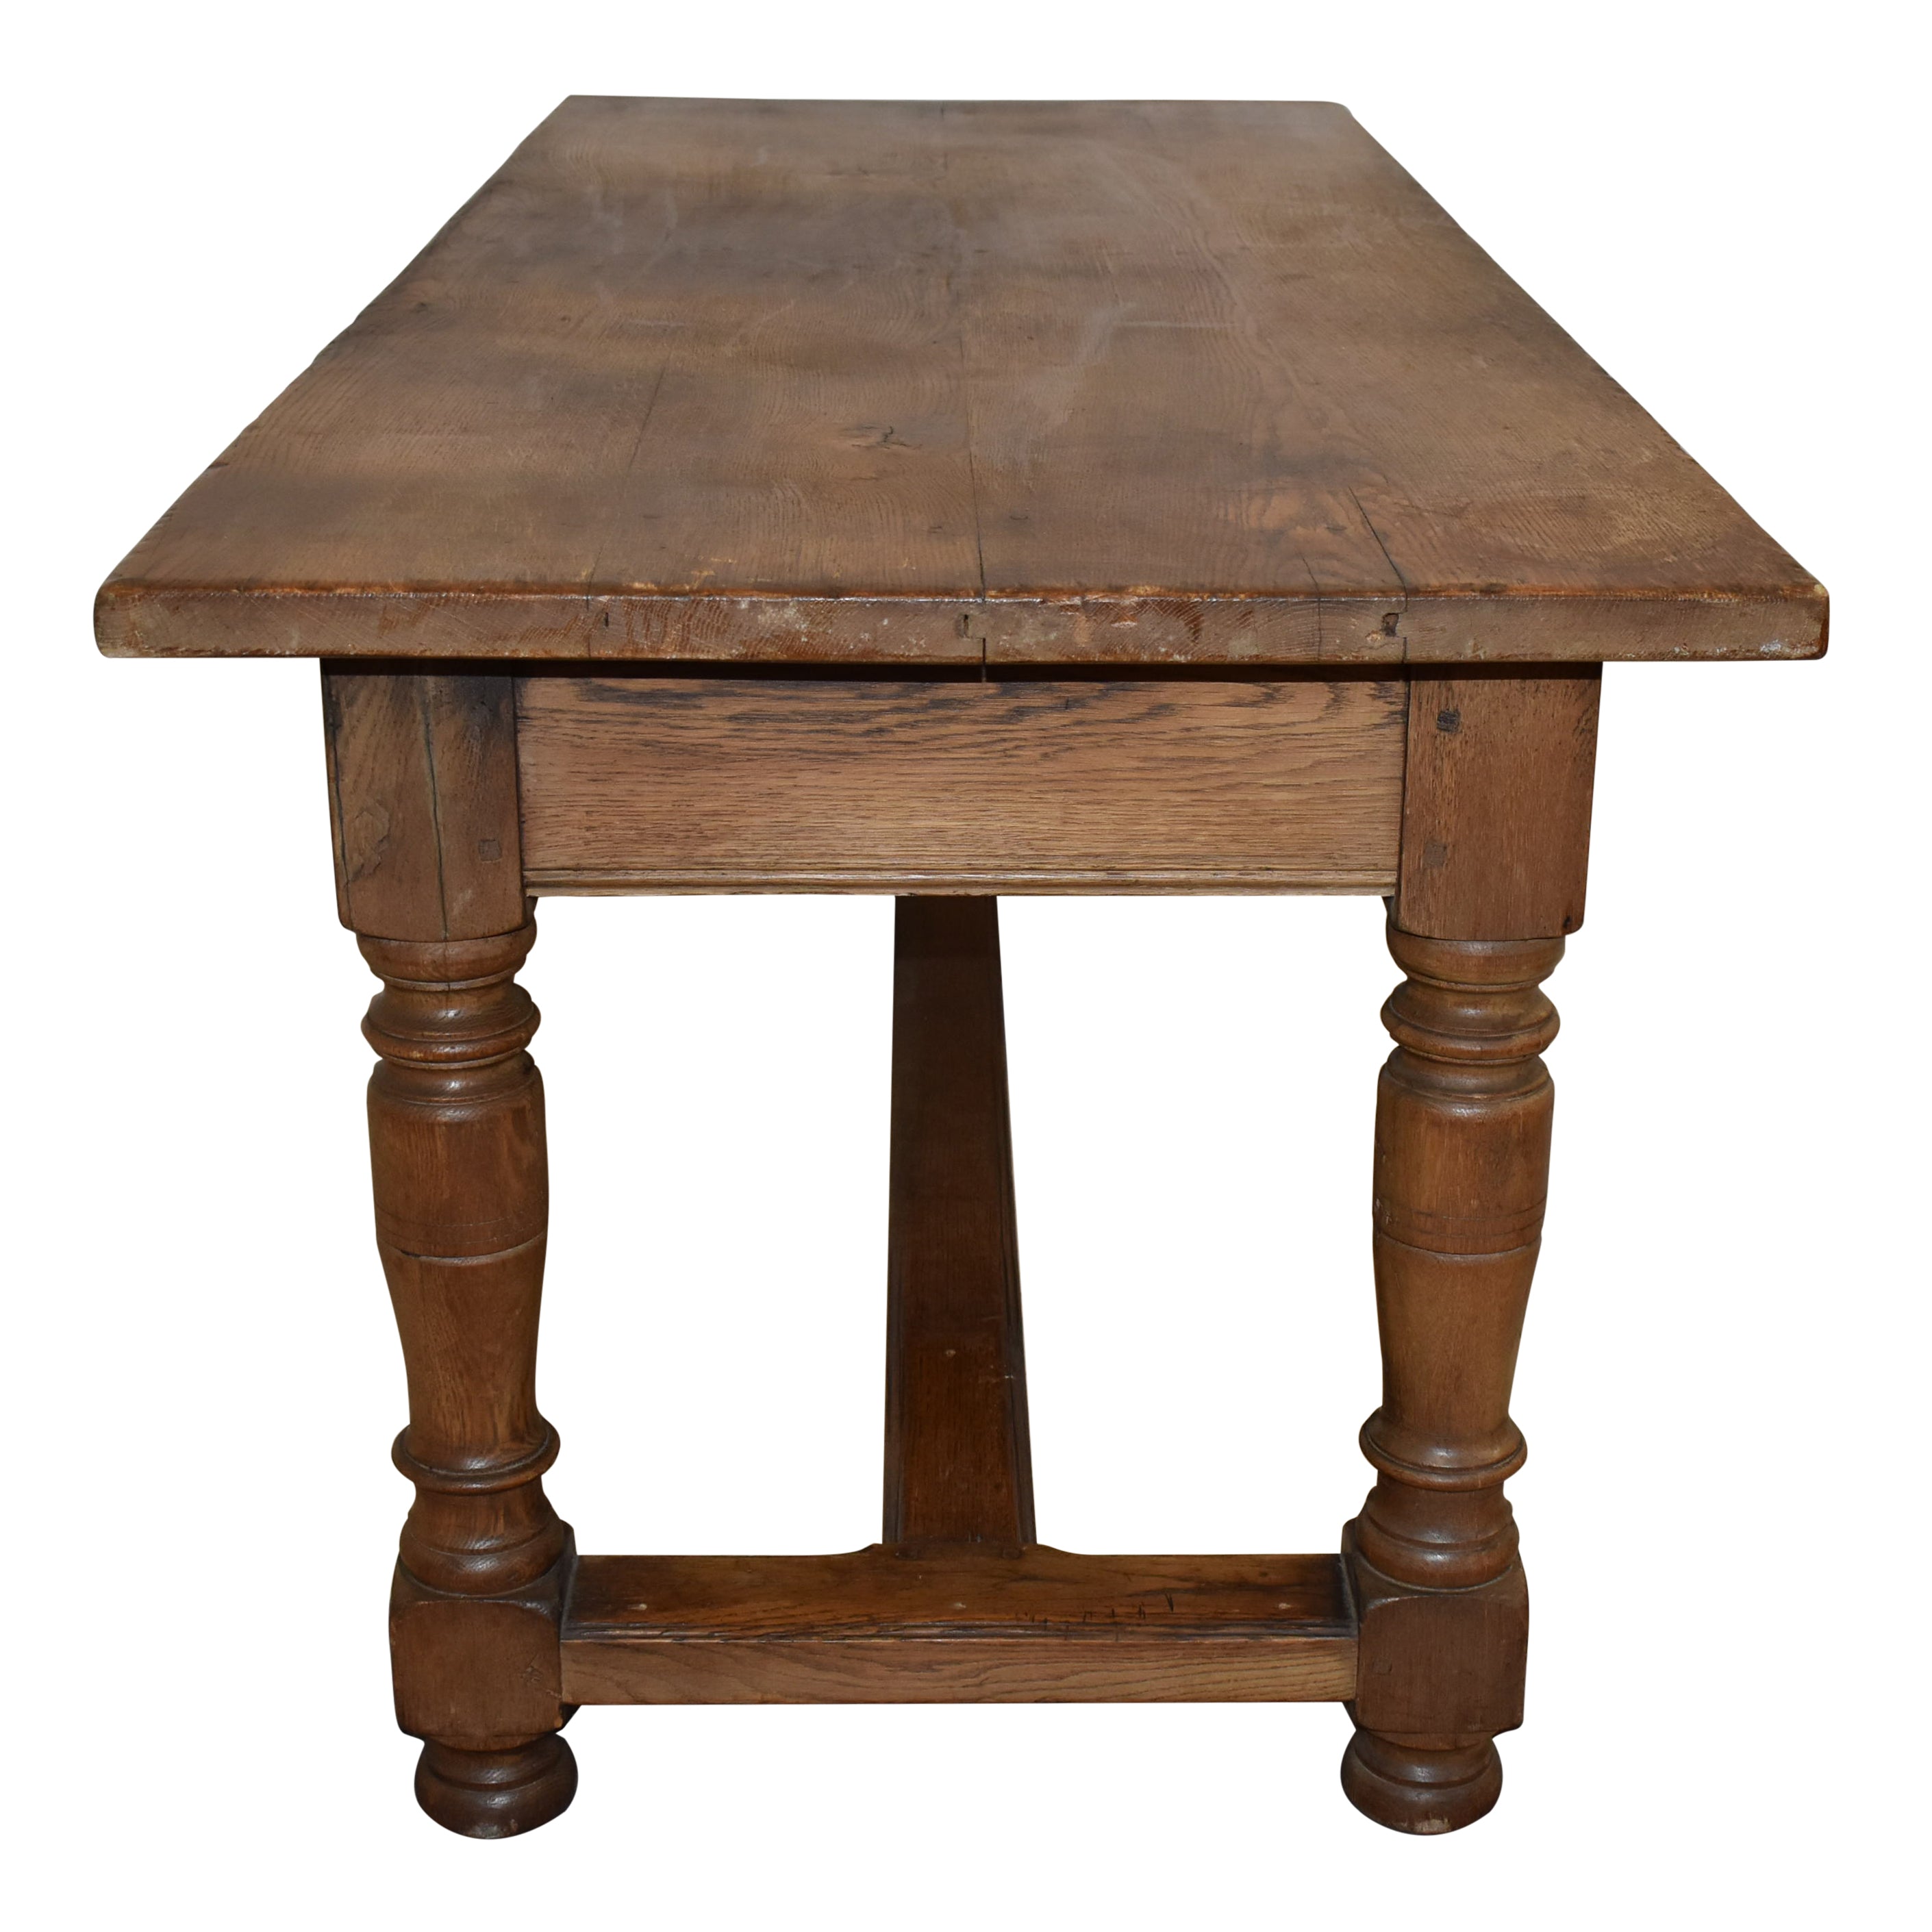 Oak Farm Table with Drawers